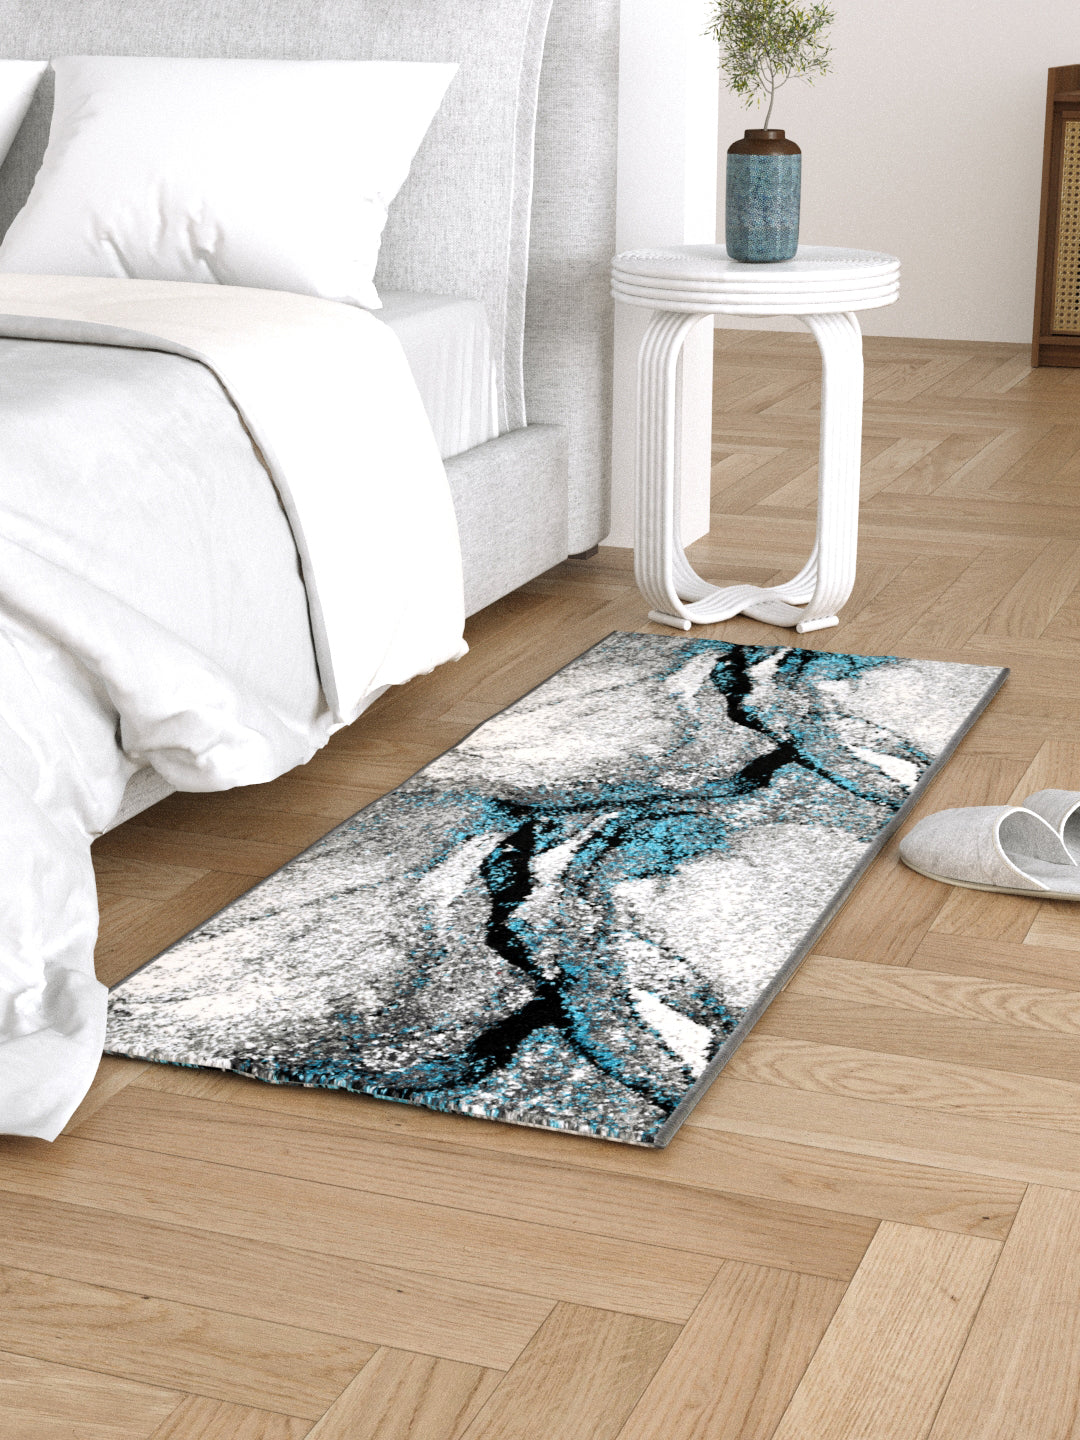 Bedside Runner Carpet Rug With Anti Skid Backing; 57x140 cms; Grey Black Abstract